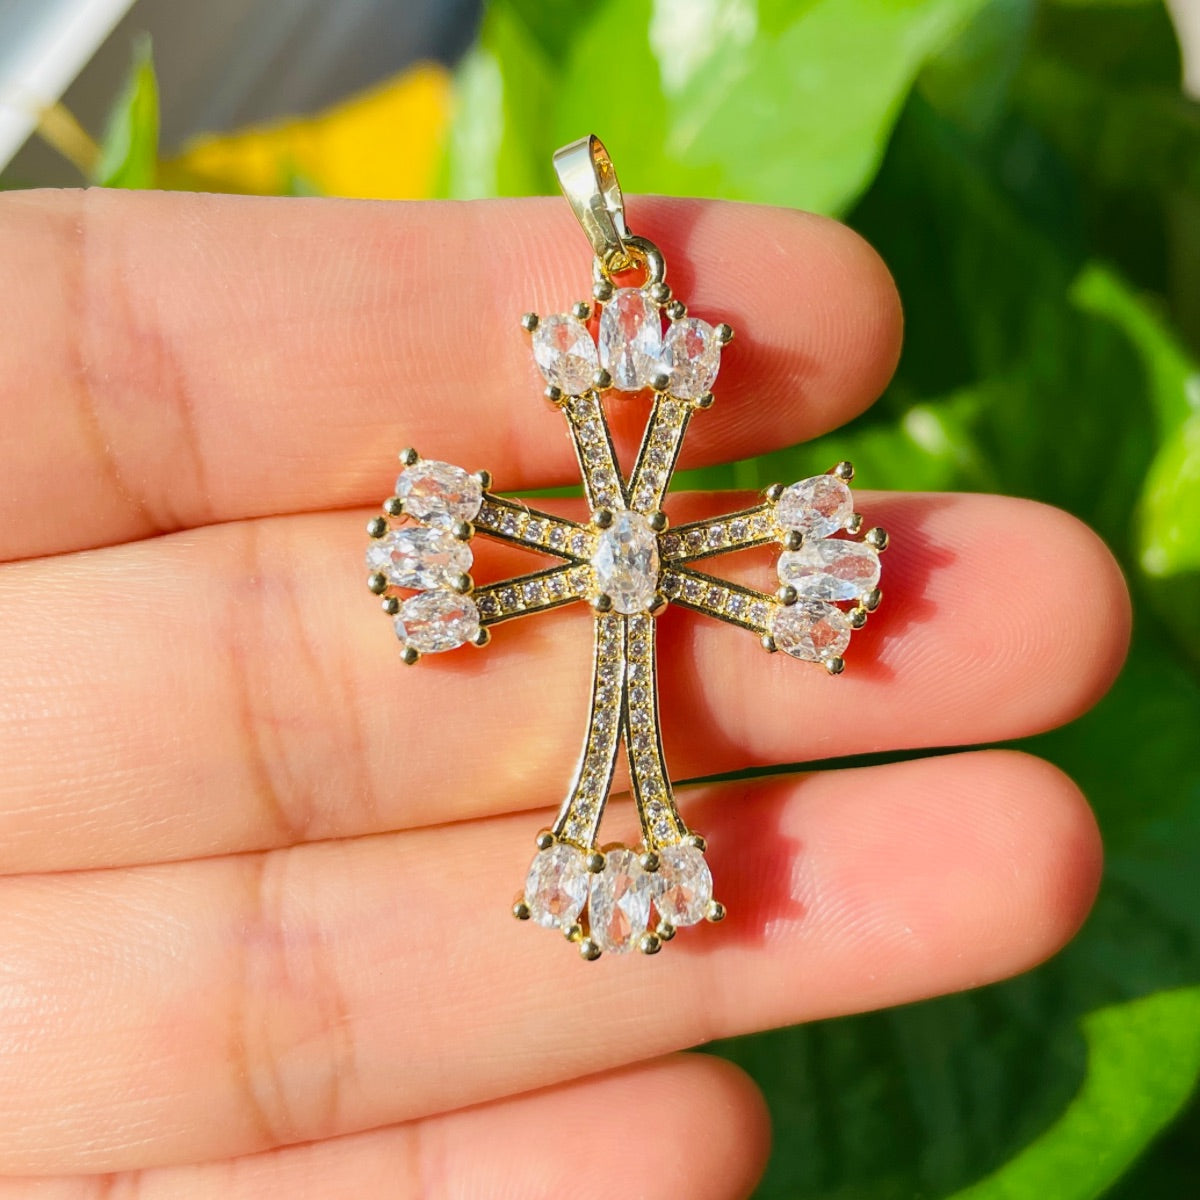 5pcs/lot 35.6*25.5mm Gold CZ Cross Charm Pendant for Bracelet & Necklace Making | Charms | Charms Beads Beyond